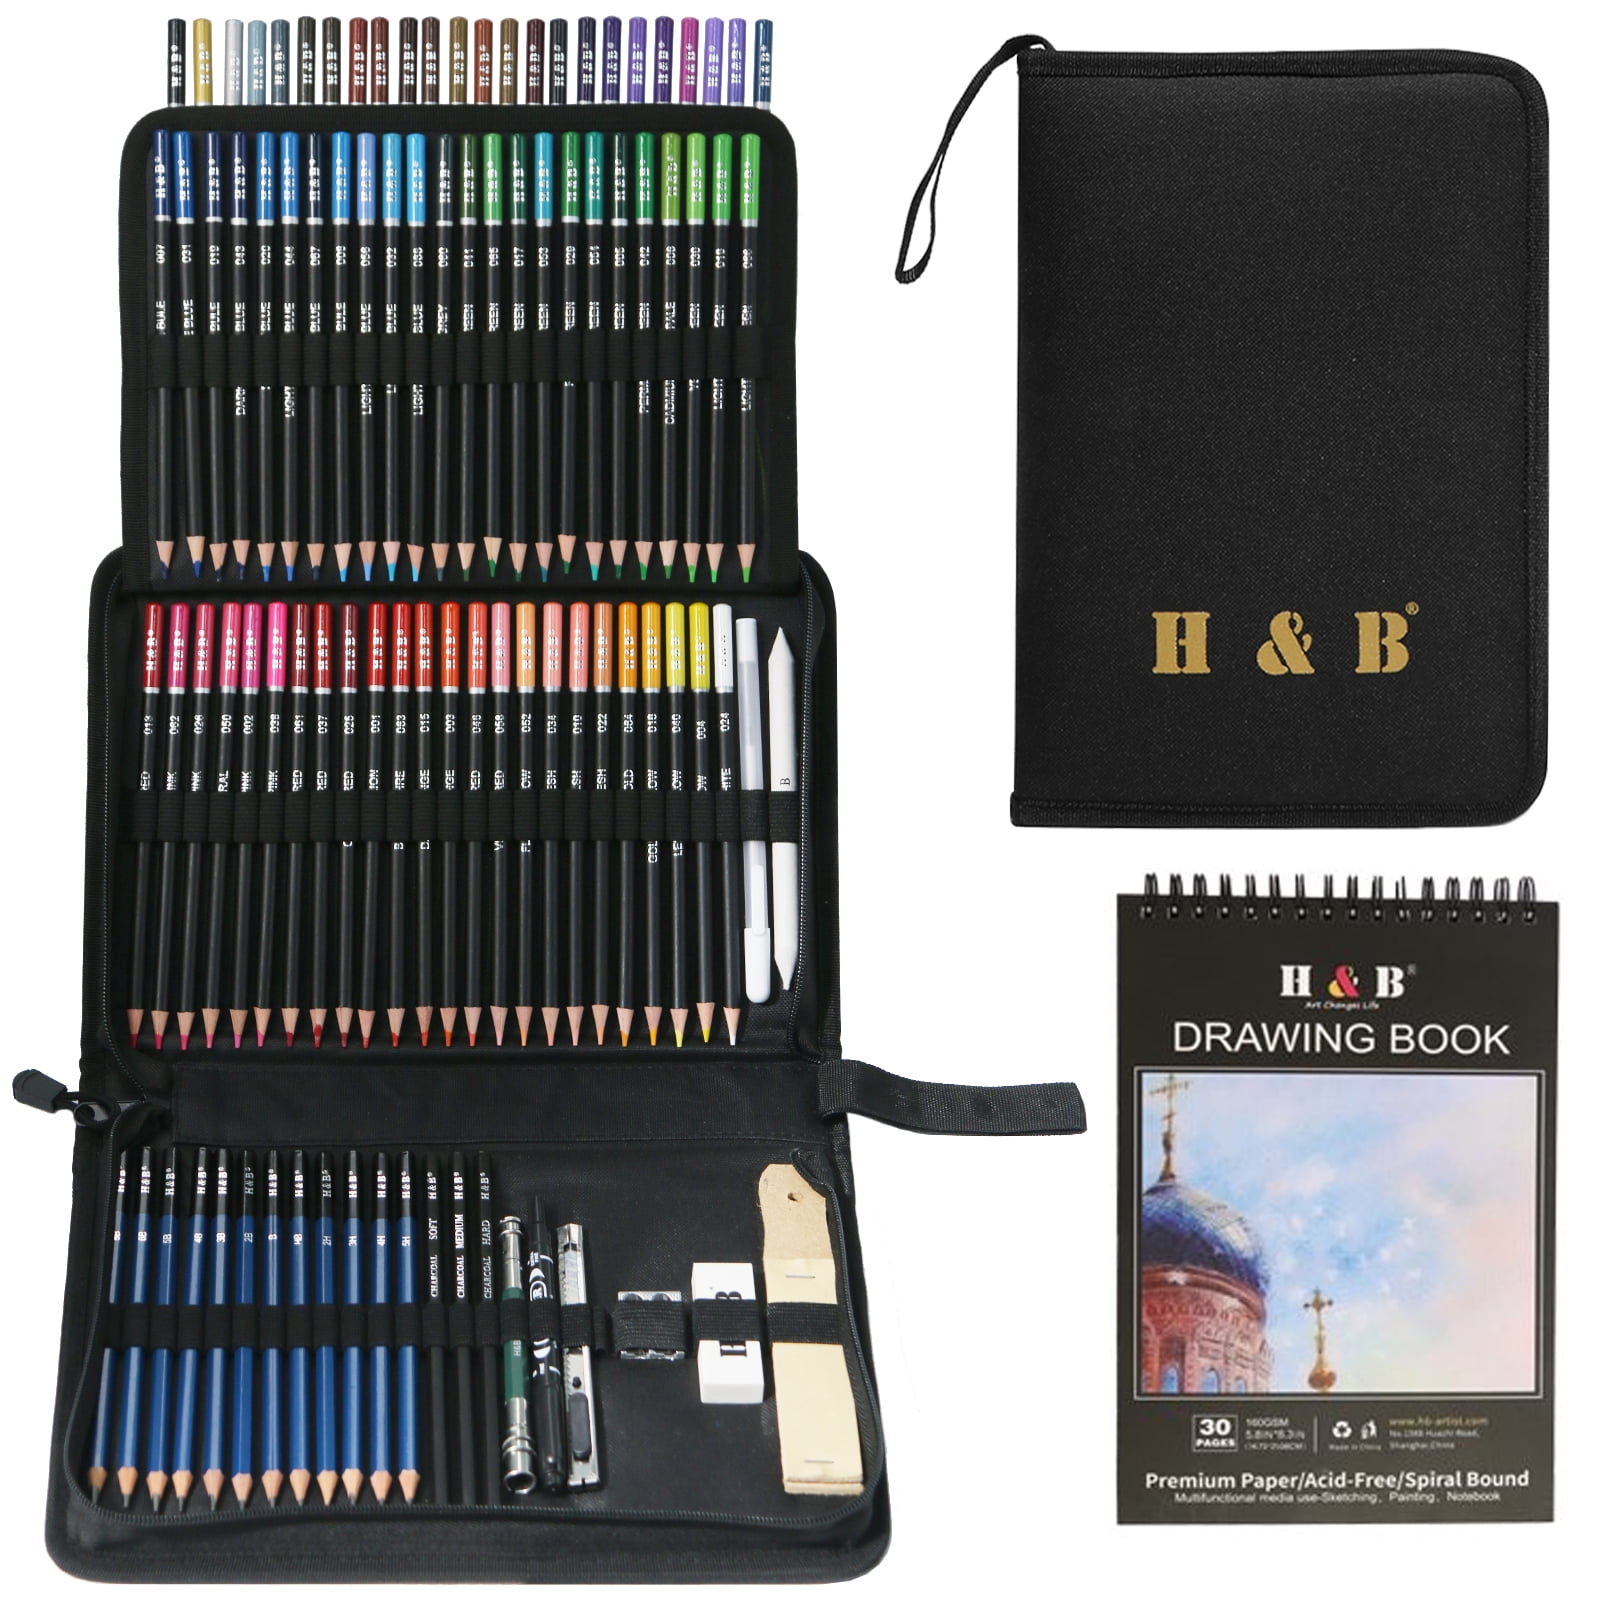  ThEast Colored Pencils for Adult Coloring Book Artist Colored  Pencil Artist Quality Wooden Oil based Colored Pencil (72 colors) : Arts,  Crafts & Sewing